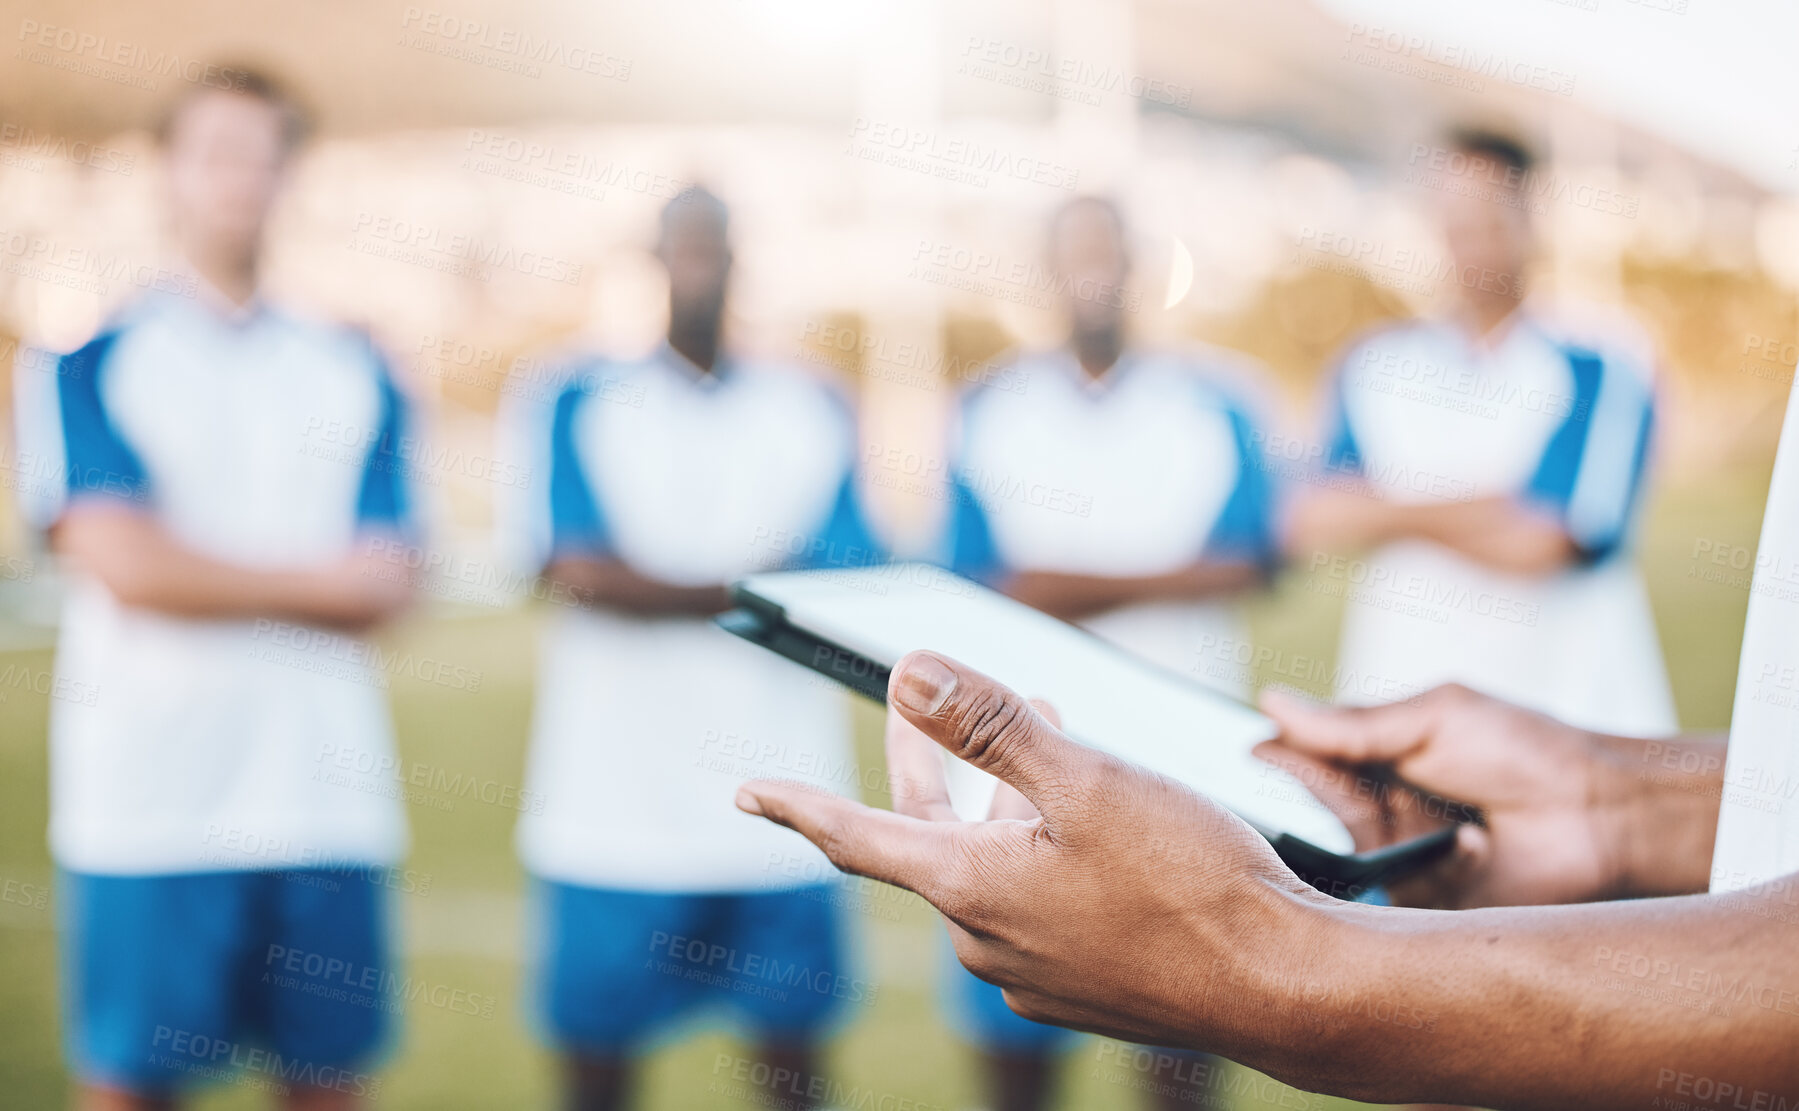 Buy stock photo Football, soccer and team statistics on a tablet and coach analysis online, internet or website on a sports field. Teamwork, digital and tactics by modern trainer tracking performance analytics